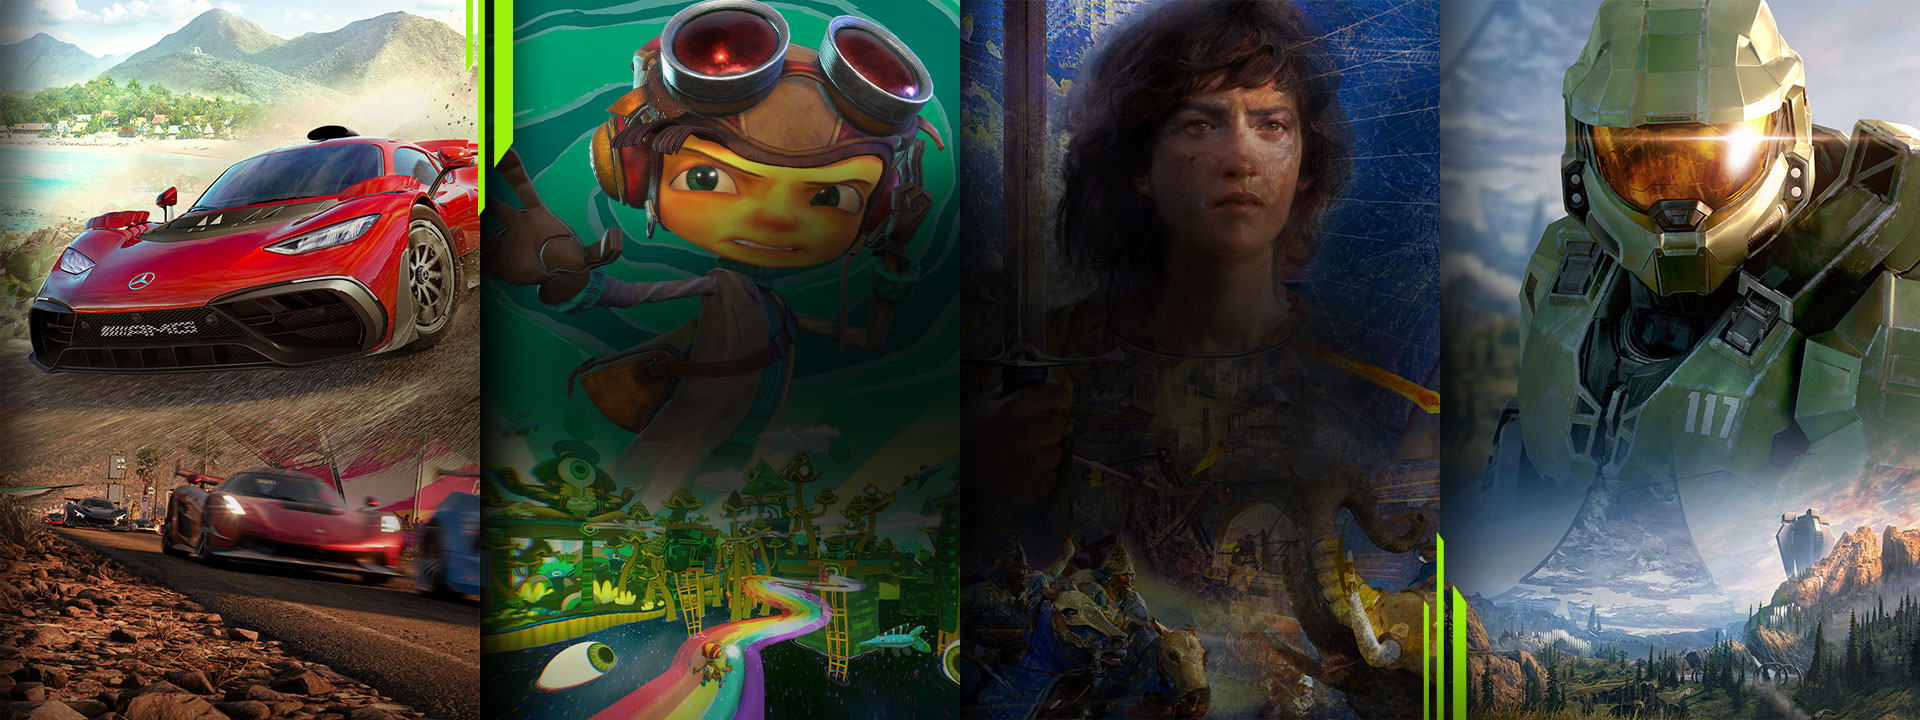 A selection of games available with Xbox Game Pass including Forza Horizon 5, Psychonauts 2, Age of Empires 4, and Halo Infinite.